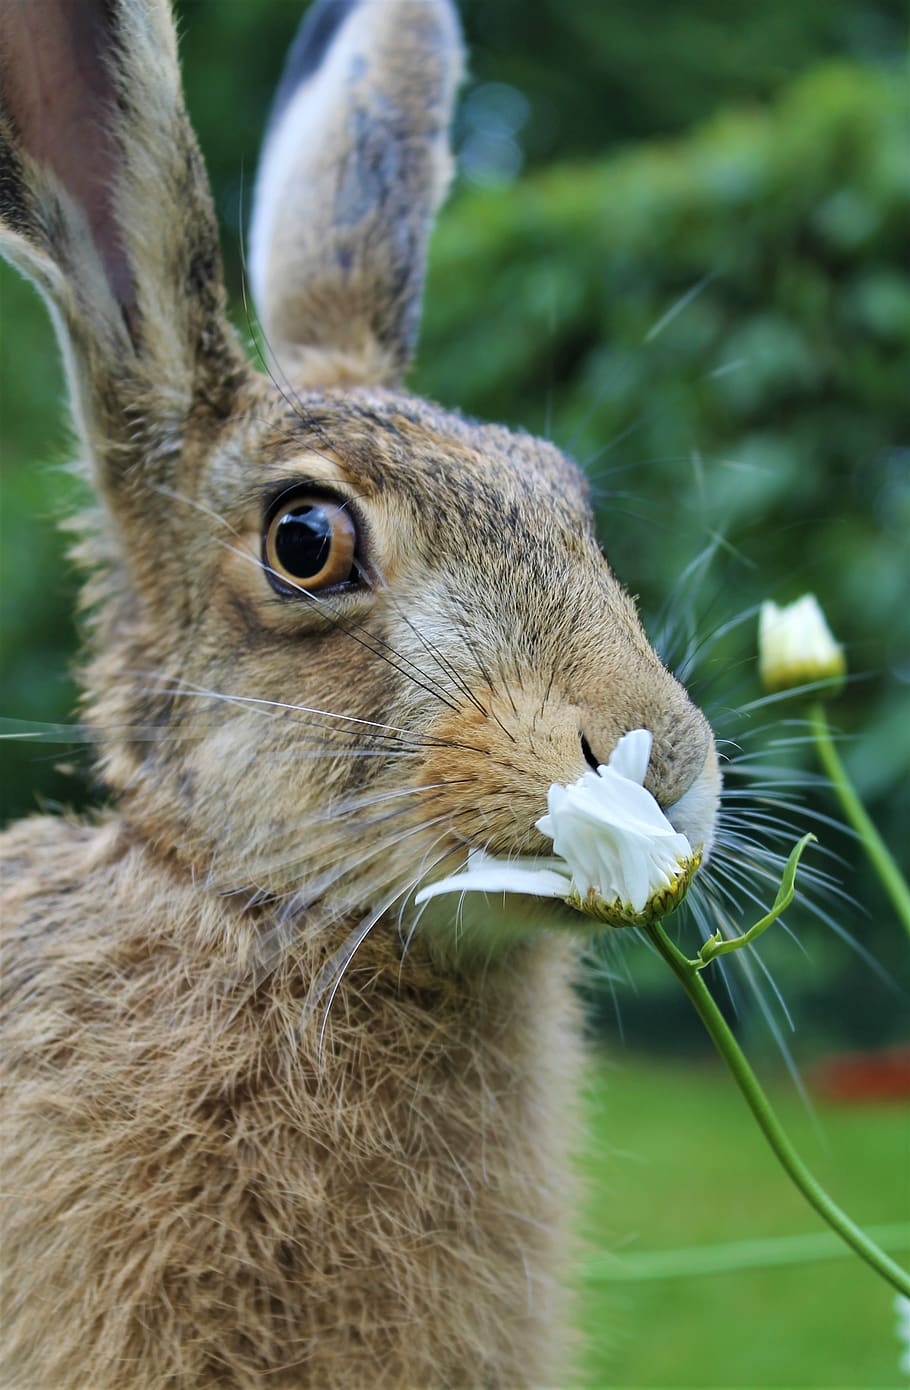 european brown hare, young hare, france, flower, animal, animal themes, mammal, one animal, close-up, focus on foreground